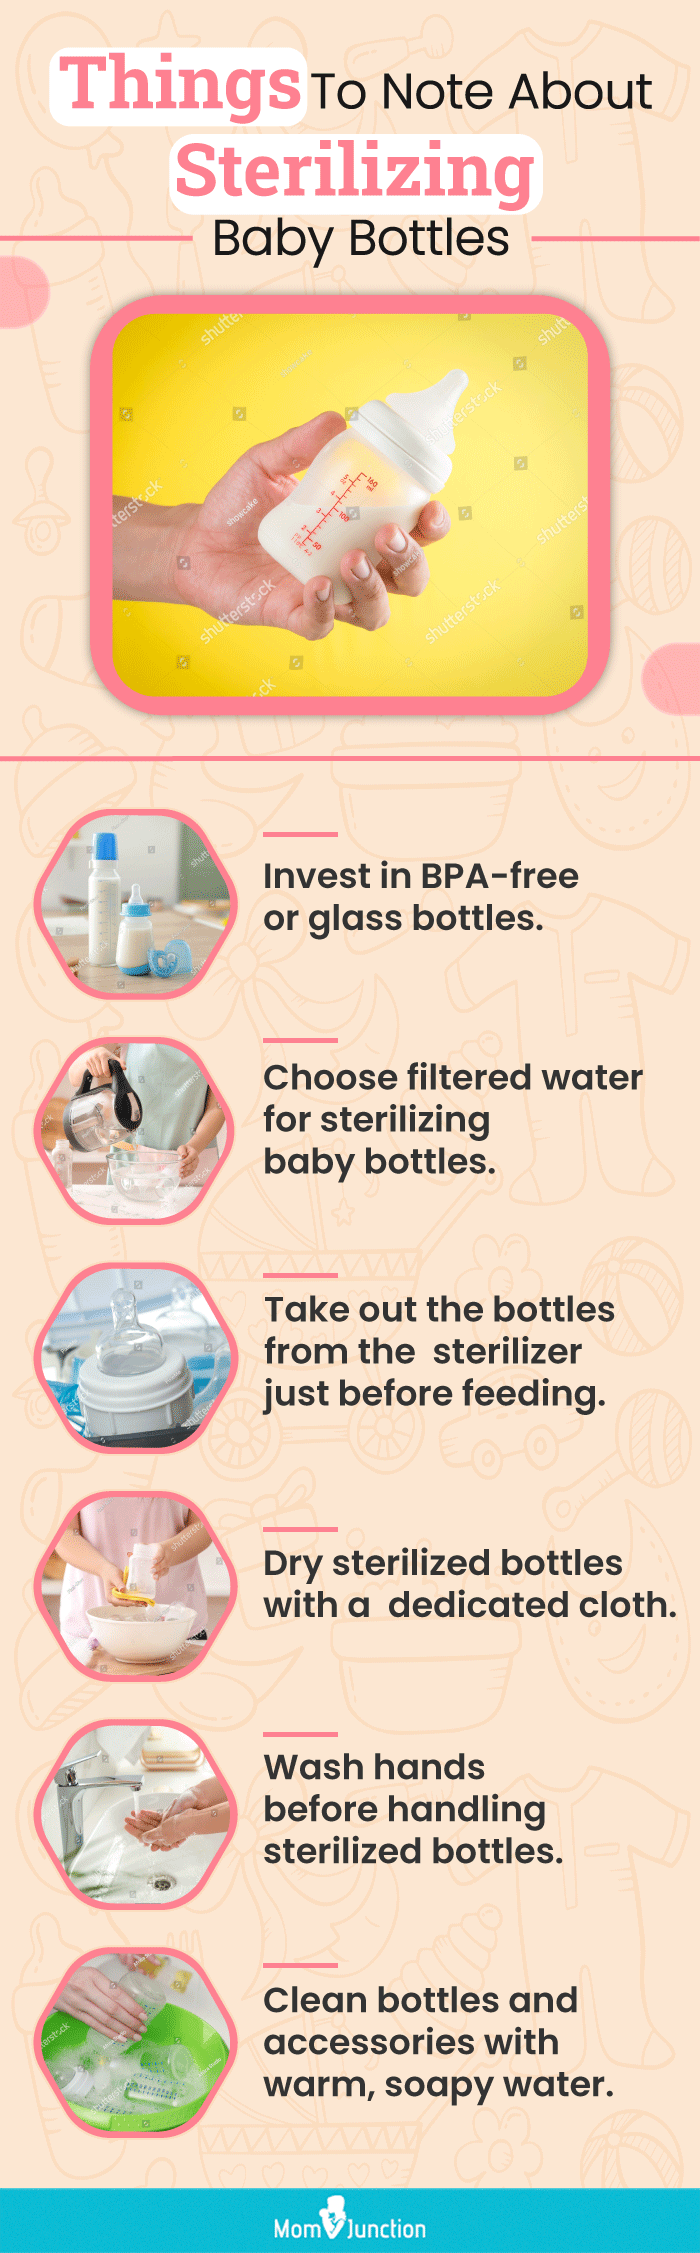 https://www.momjunction.com/wp-content/uploads/2023/01/Things-to-note-about-sterilizing-Baby-Bottles.gif